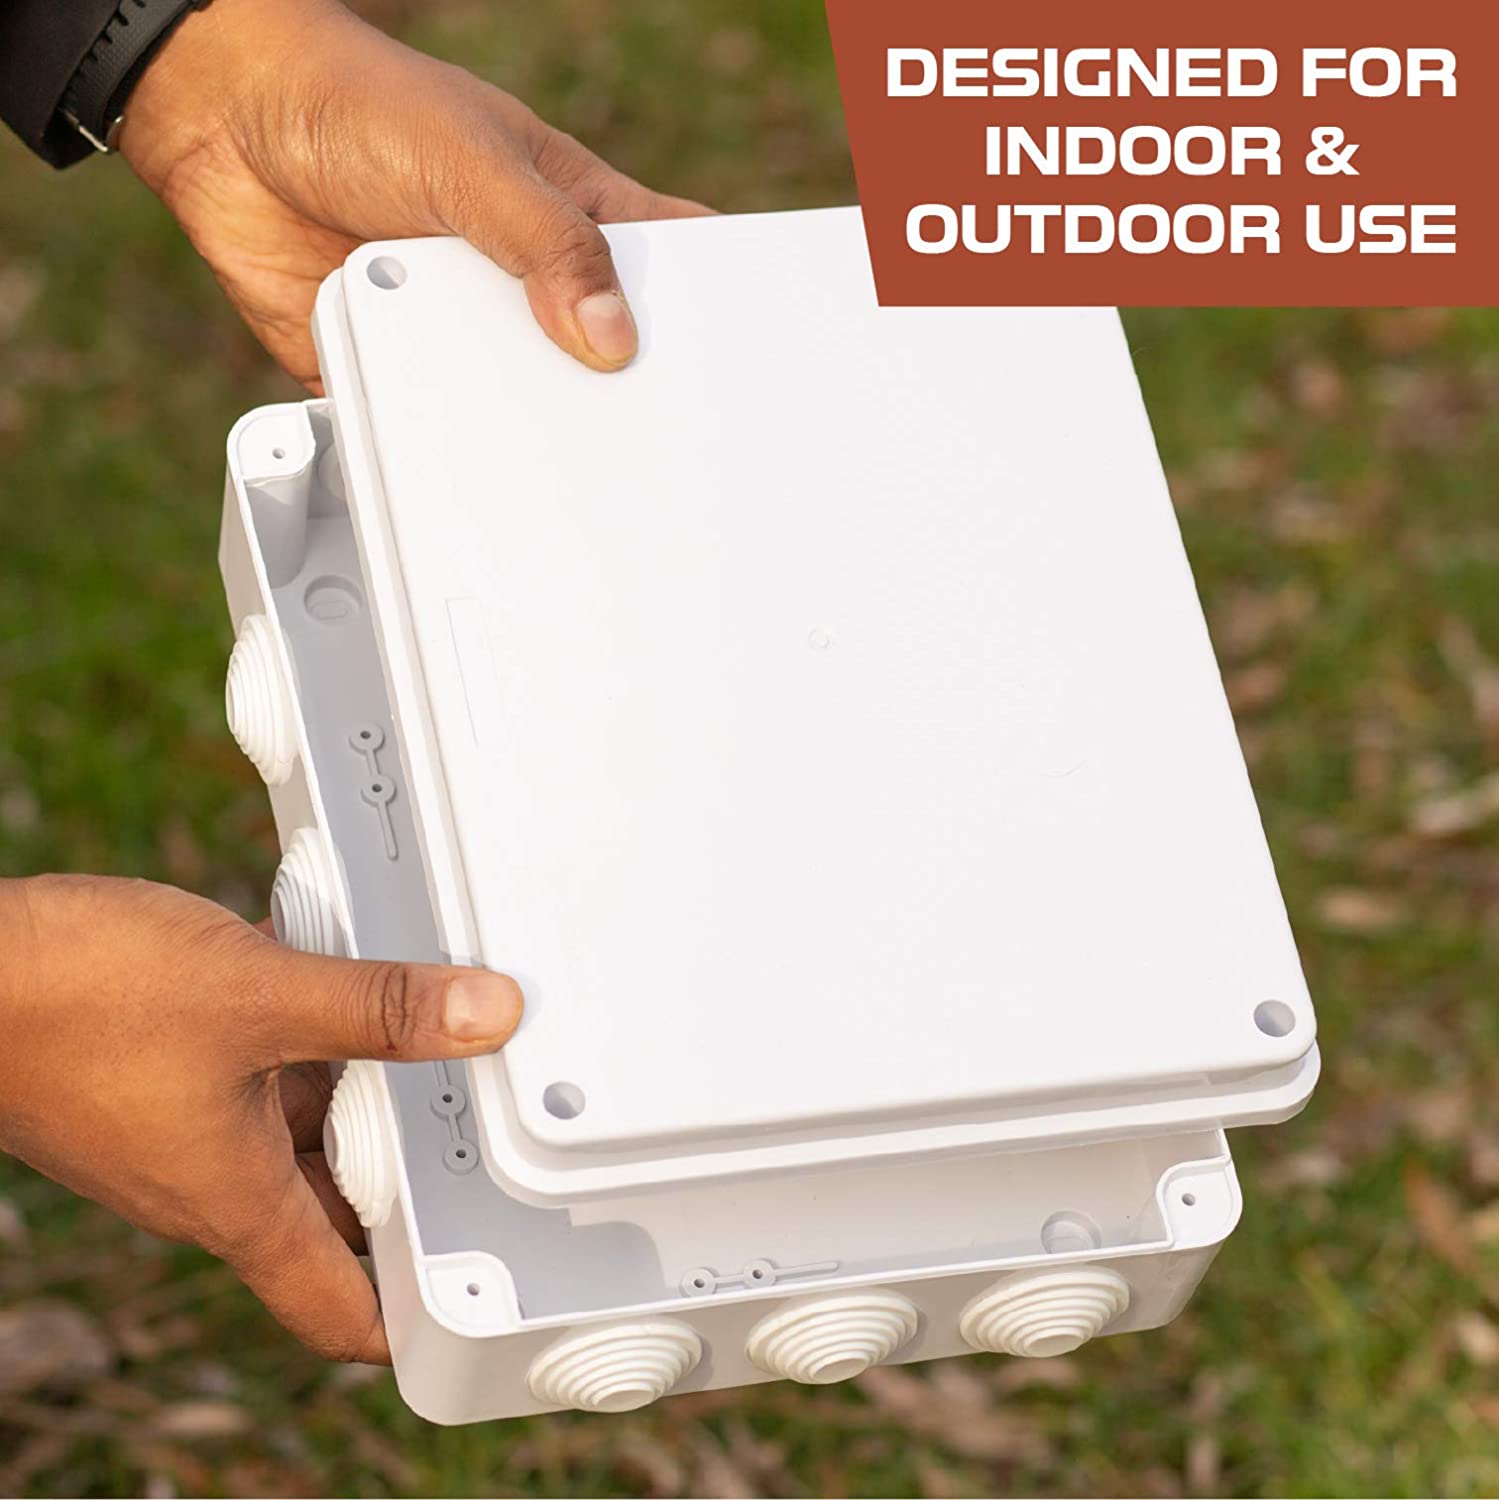 Outdoor Electrical Junction Box - Large 10 x 8 Inch Waterproof